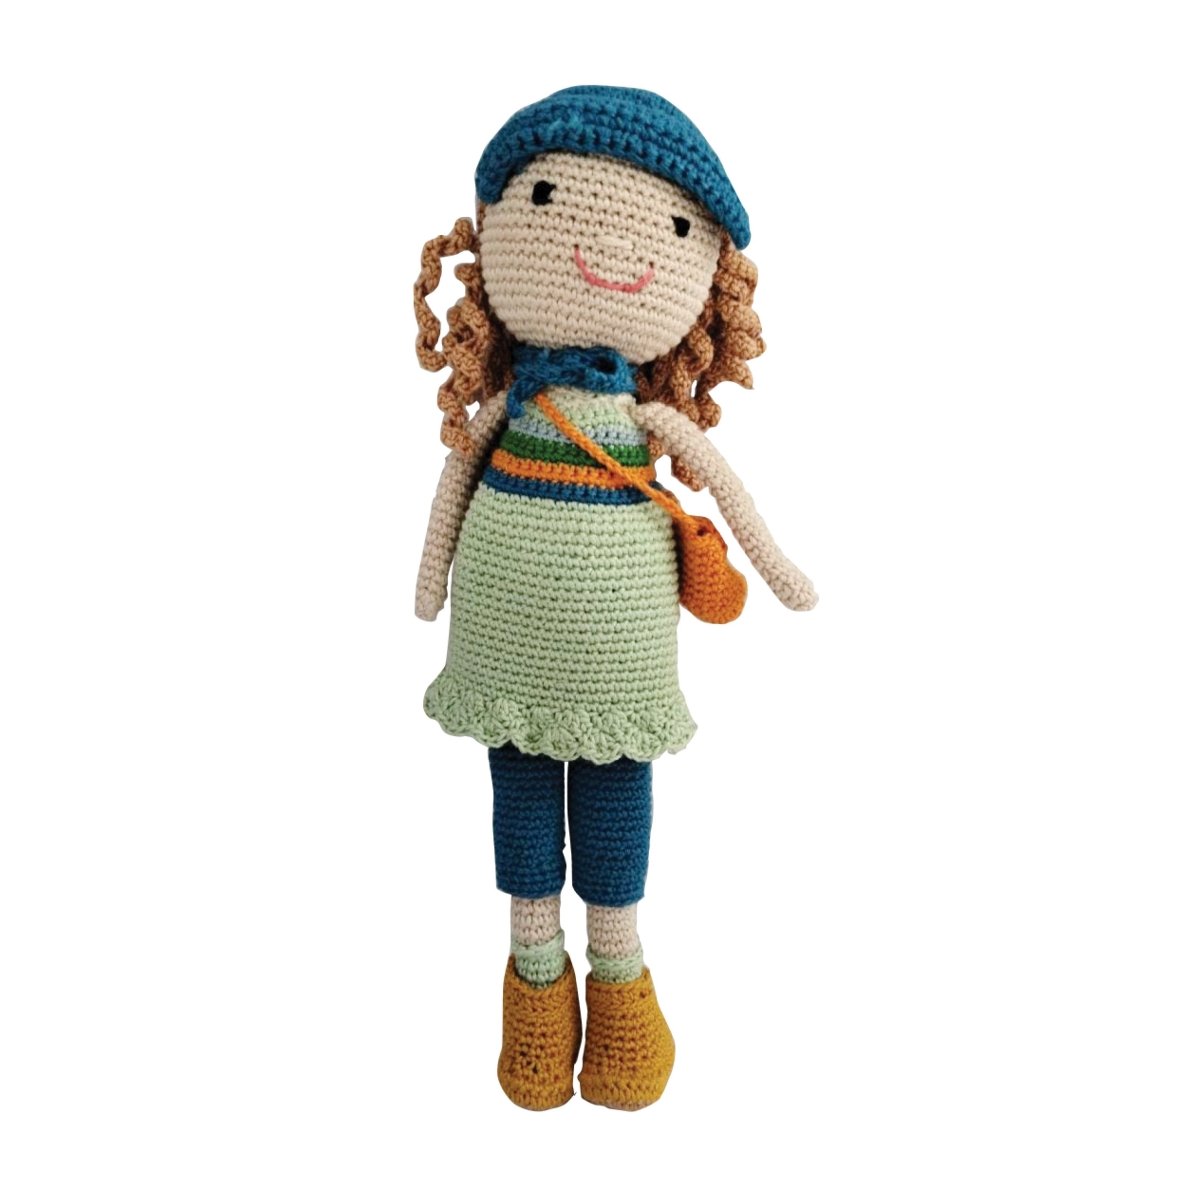 Nuluv-Happy Threads Nora Doll - NORD0461